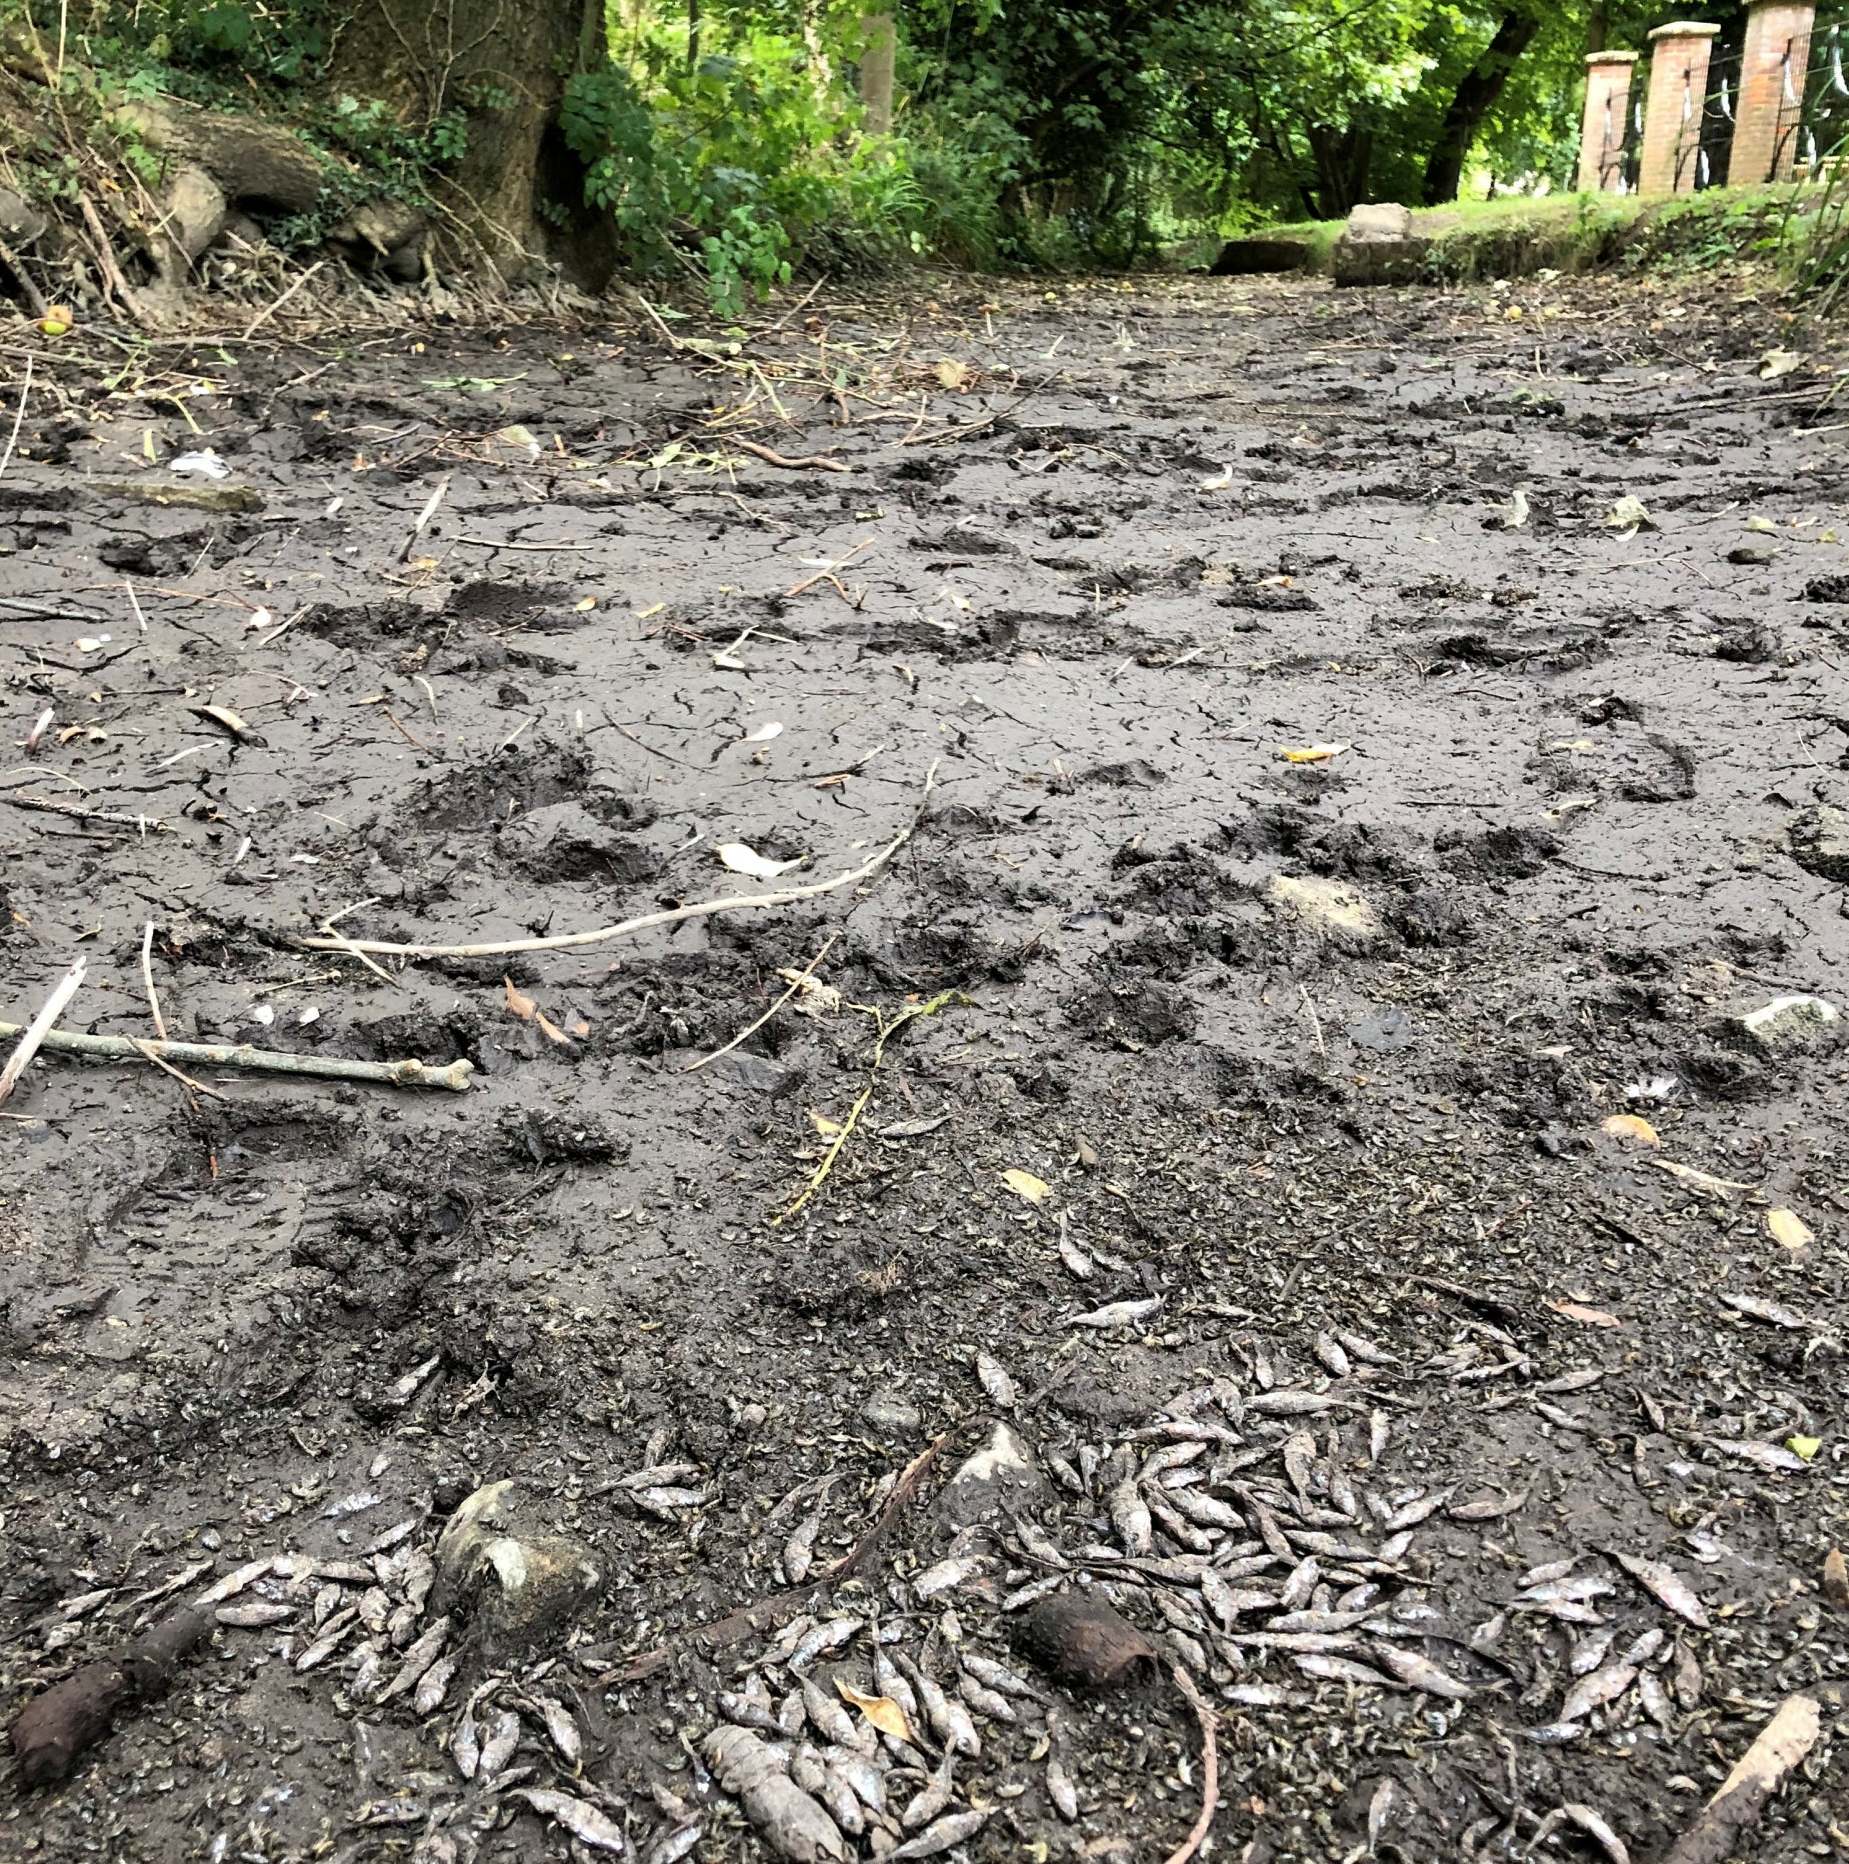 Hundreds of dead shrimp and fish have died in what was previously a free-flowing river (Allen Beechey/SWNS)